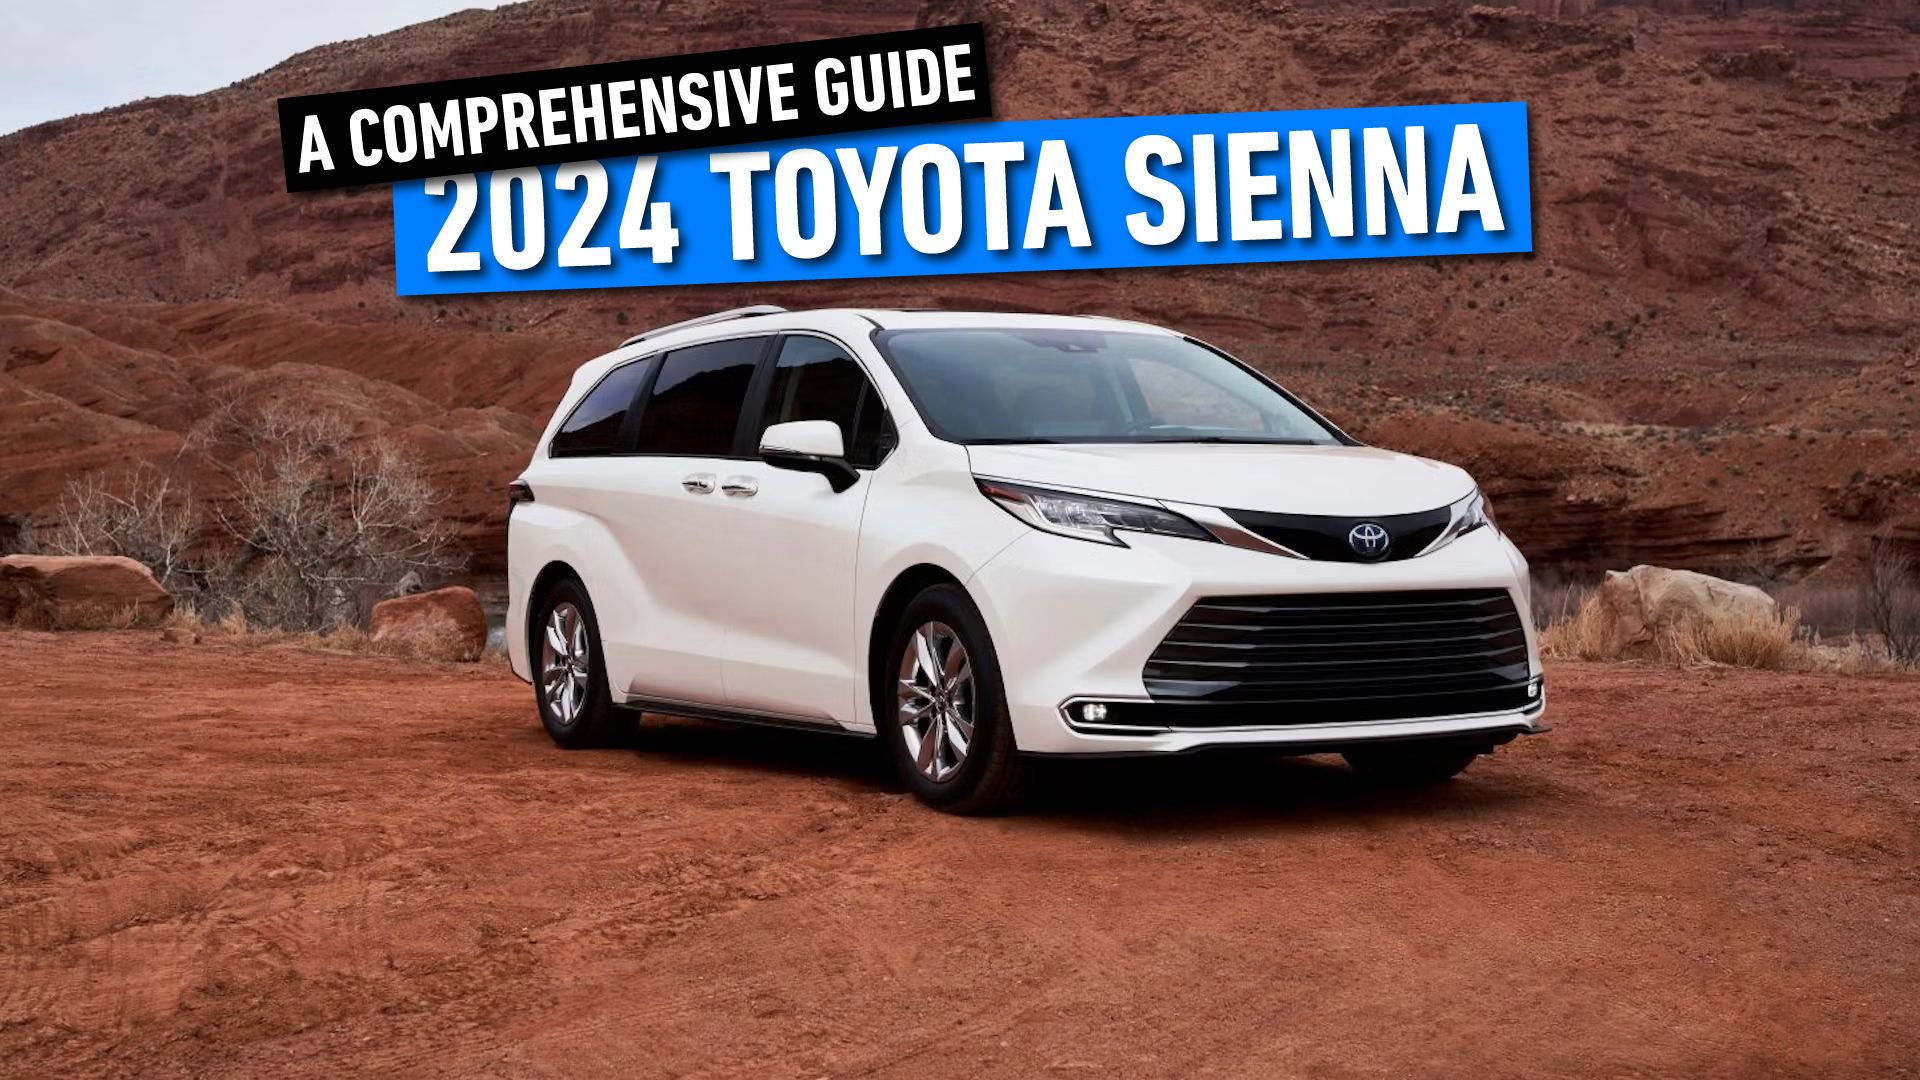 2024 Toyota Sienna: A Comprehensive Guide On Features, Specs, And Pricing